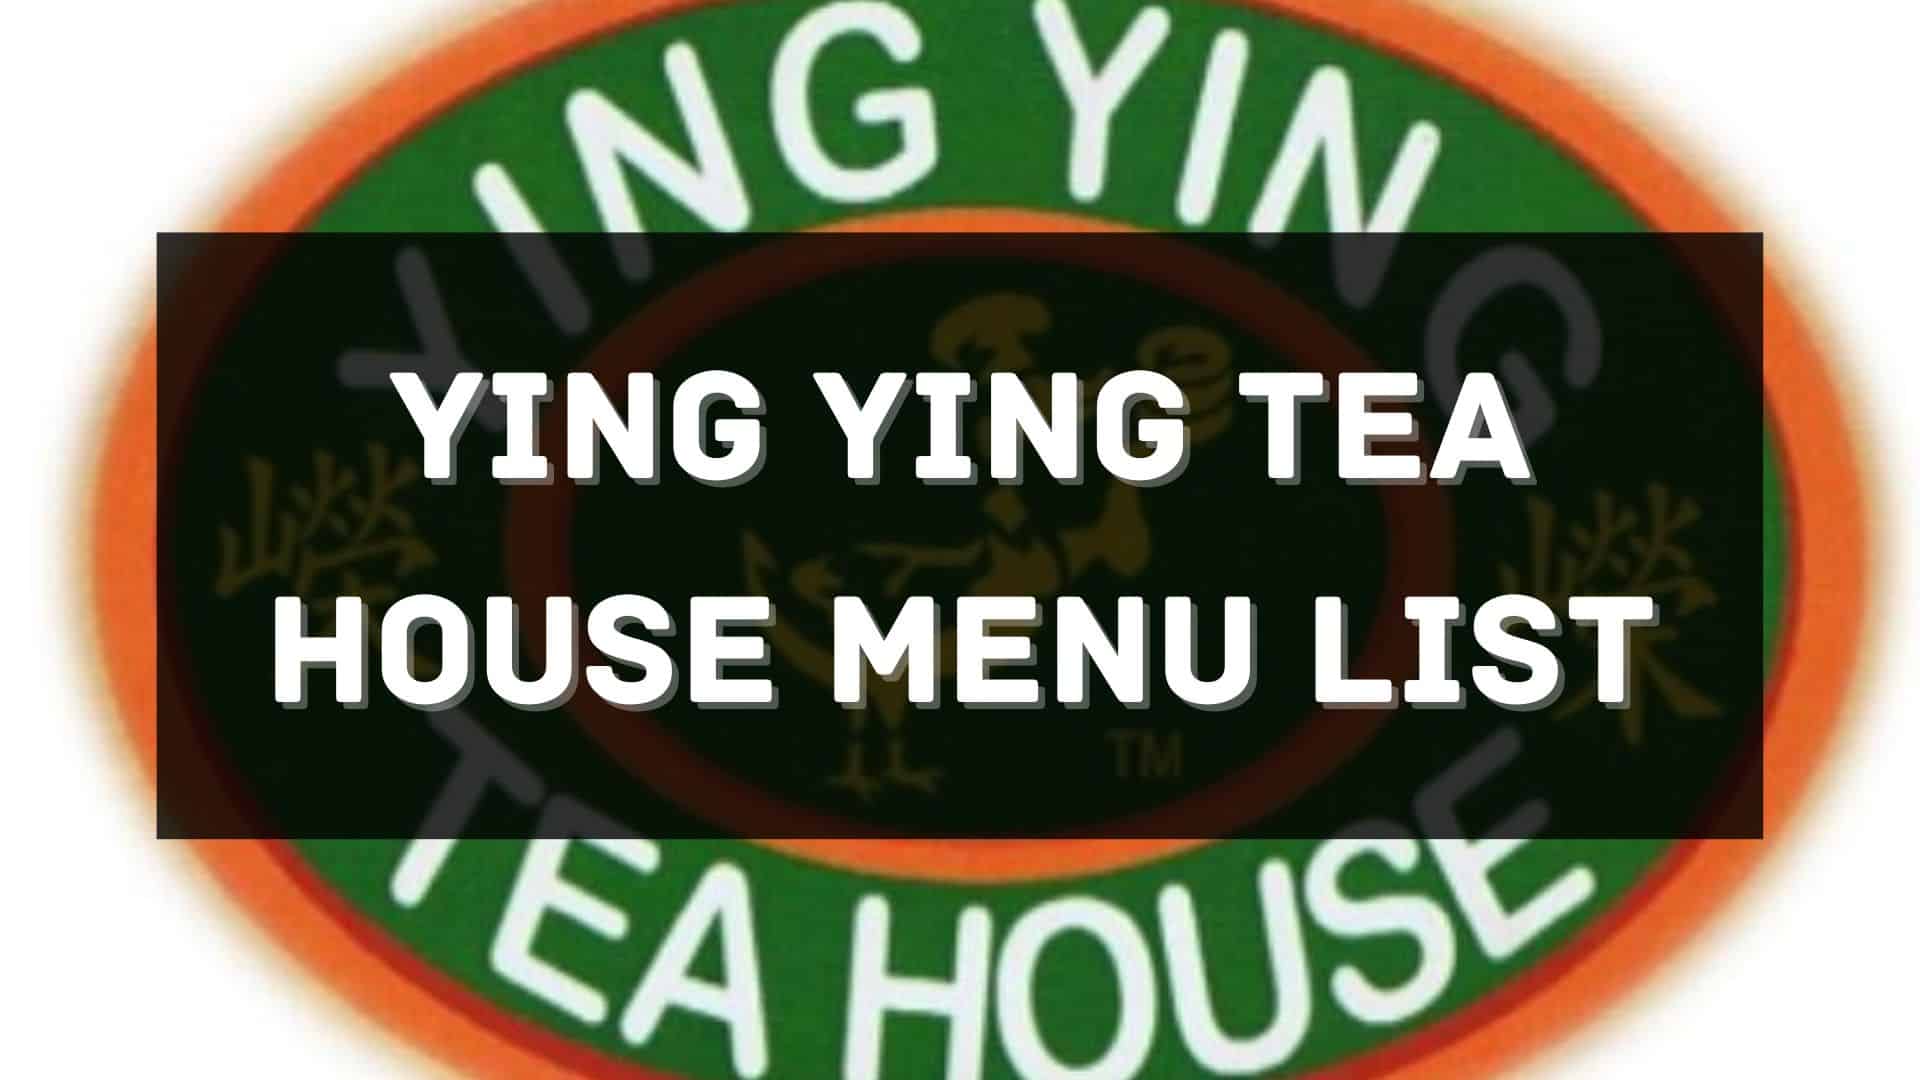 ying ying tea house menu prices philippines